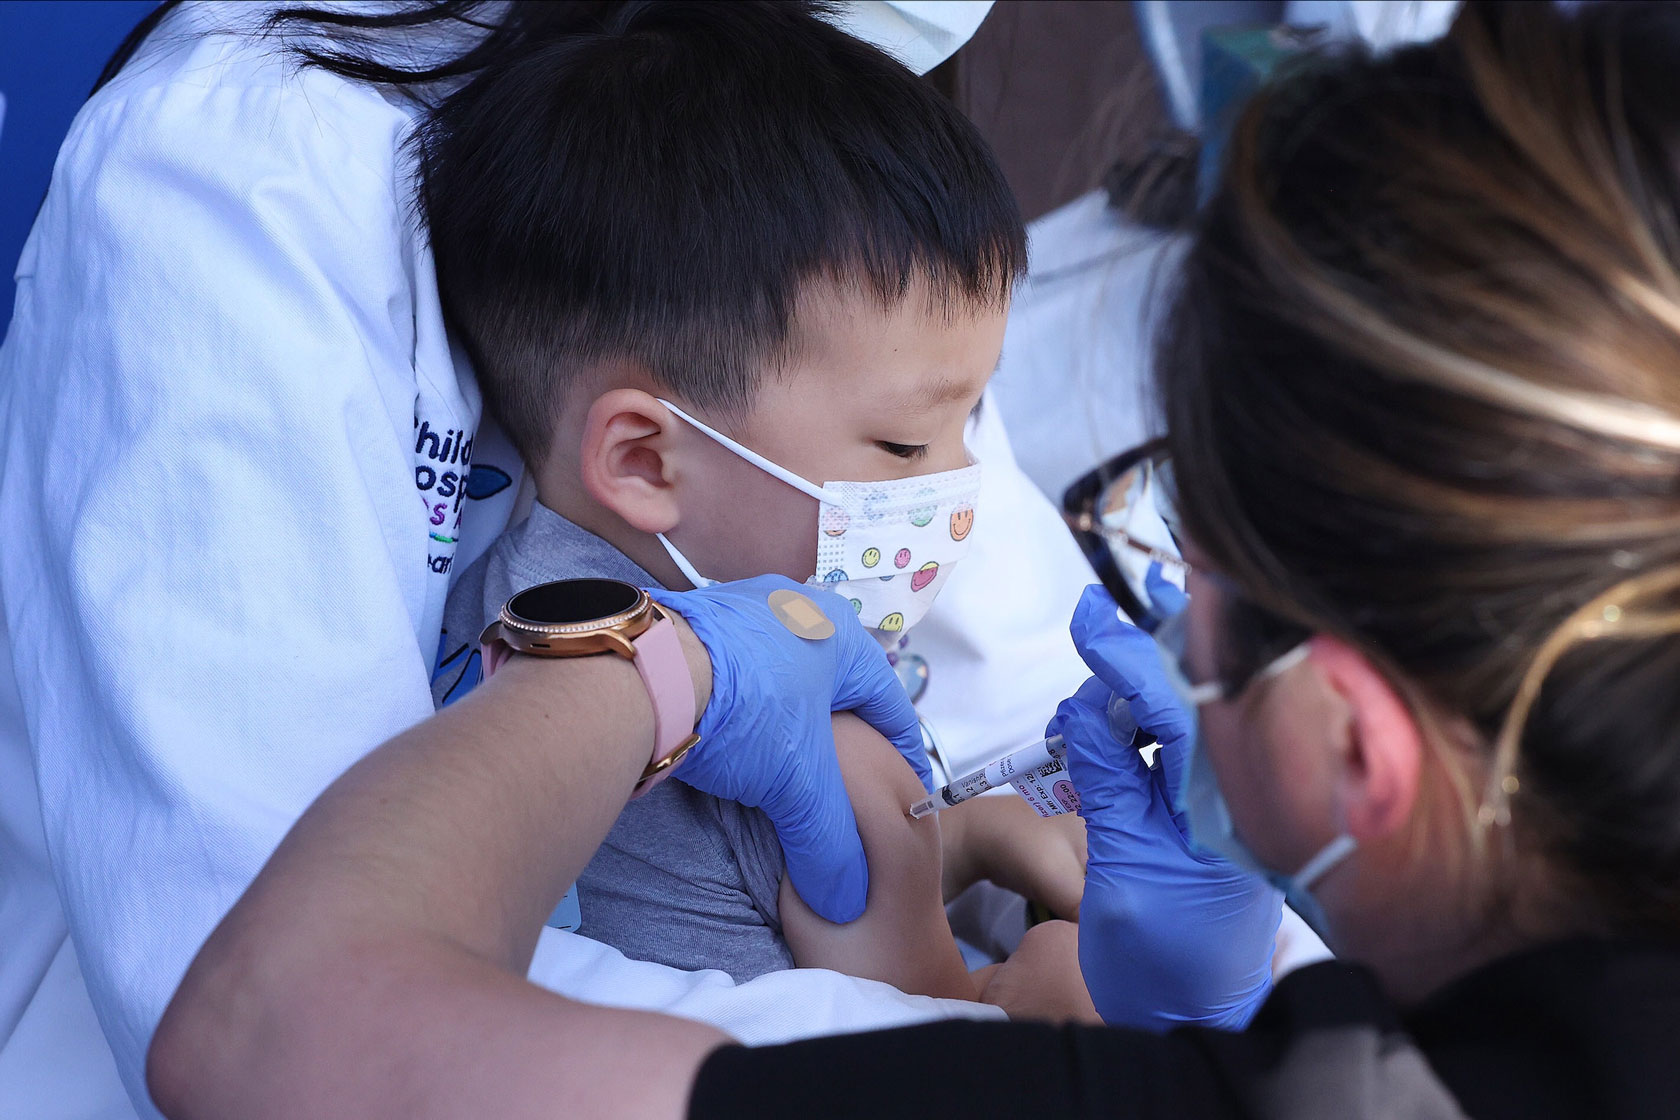 A doctor administers a vaccine shot to a child wearing a mask.